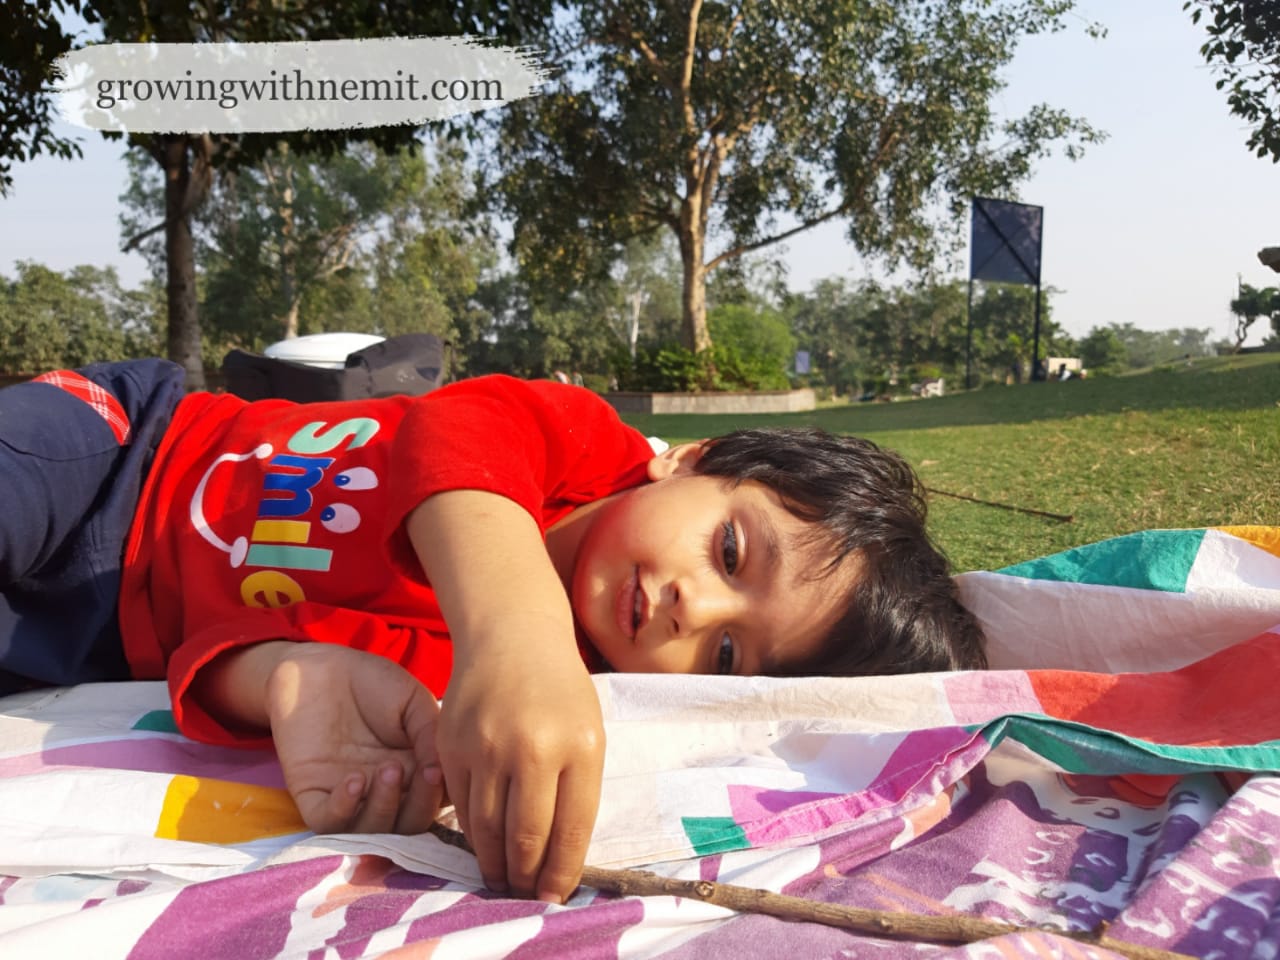 Plan a Picnic Day with your family at Indraprastha Park, Delhi